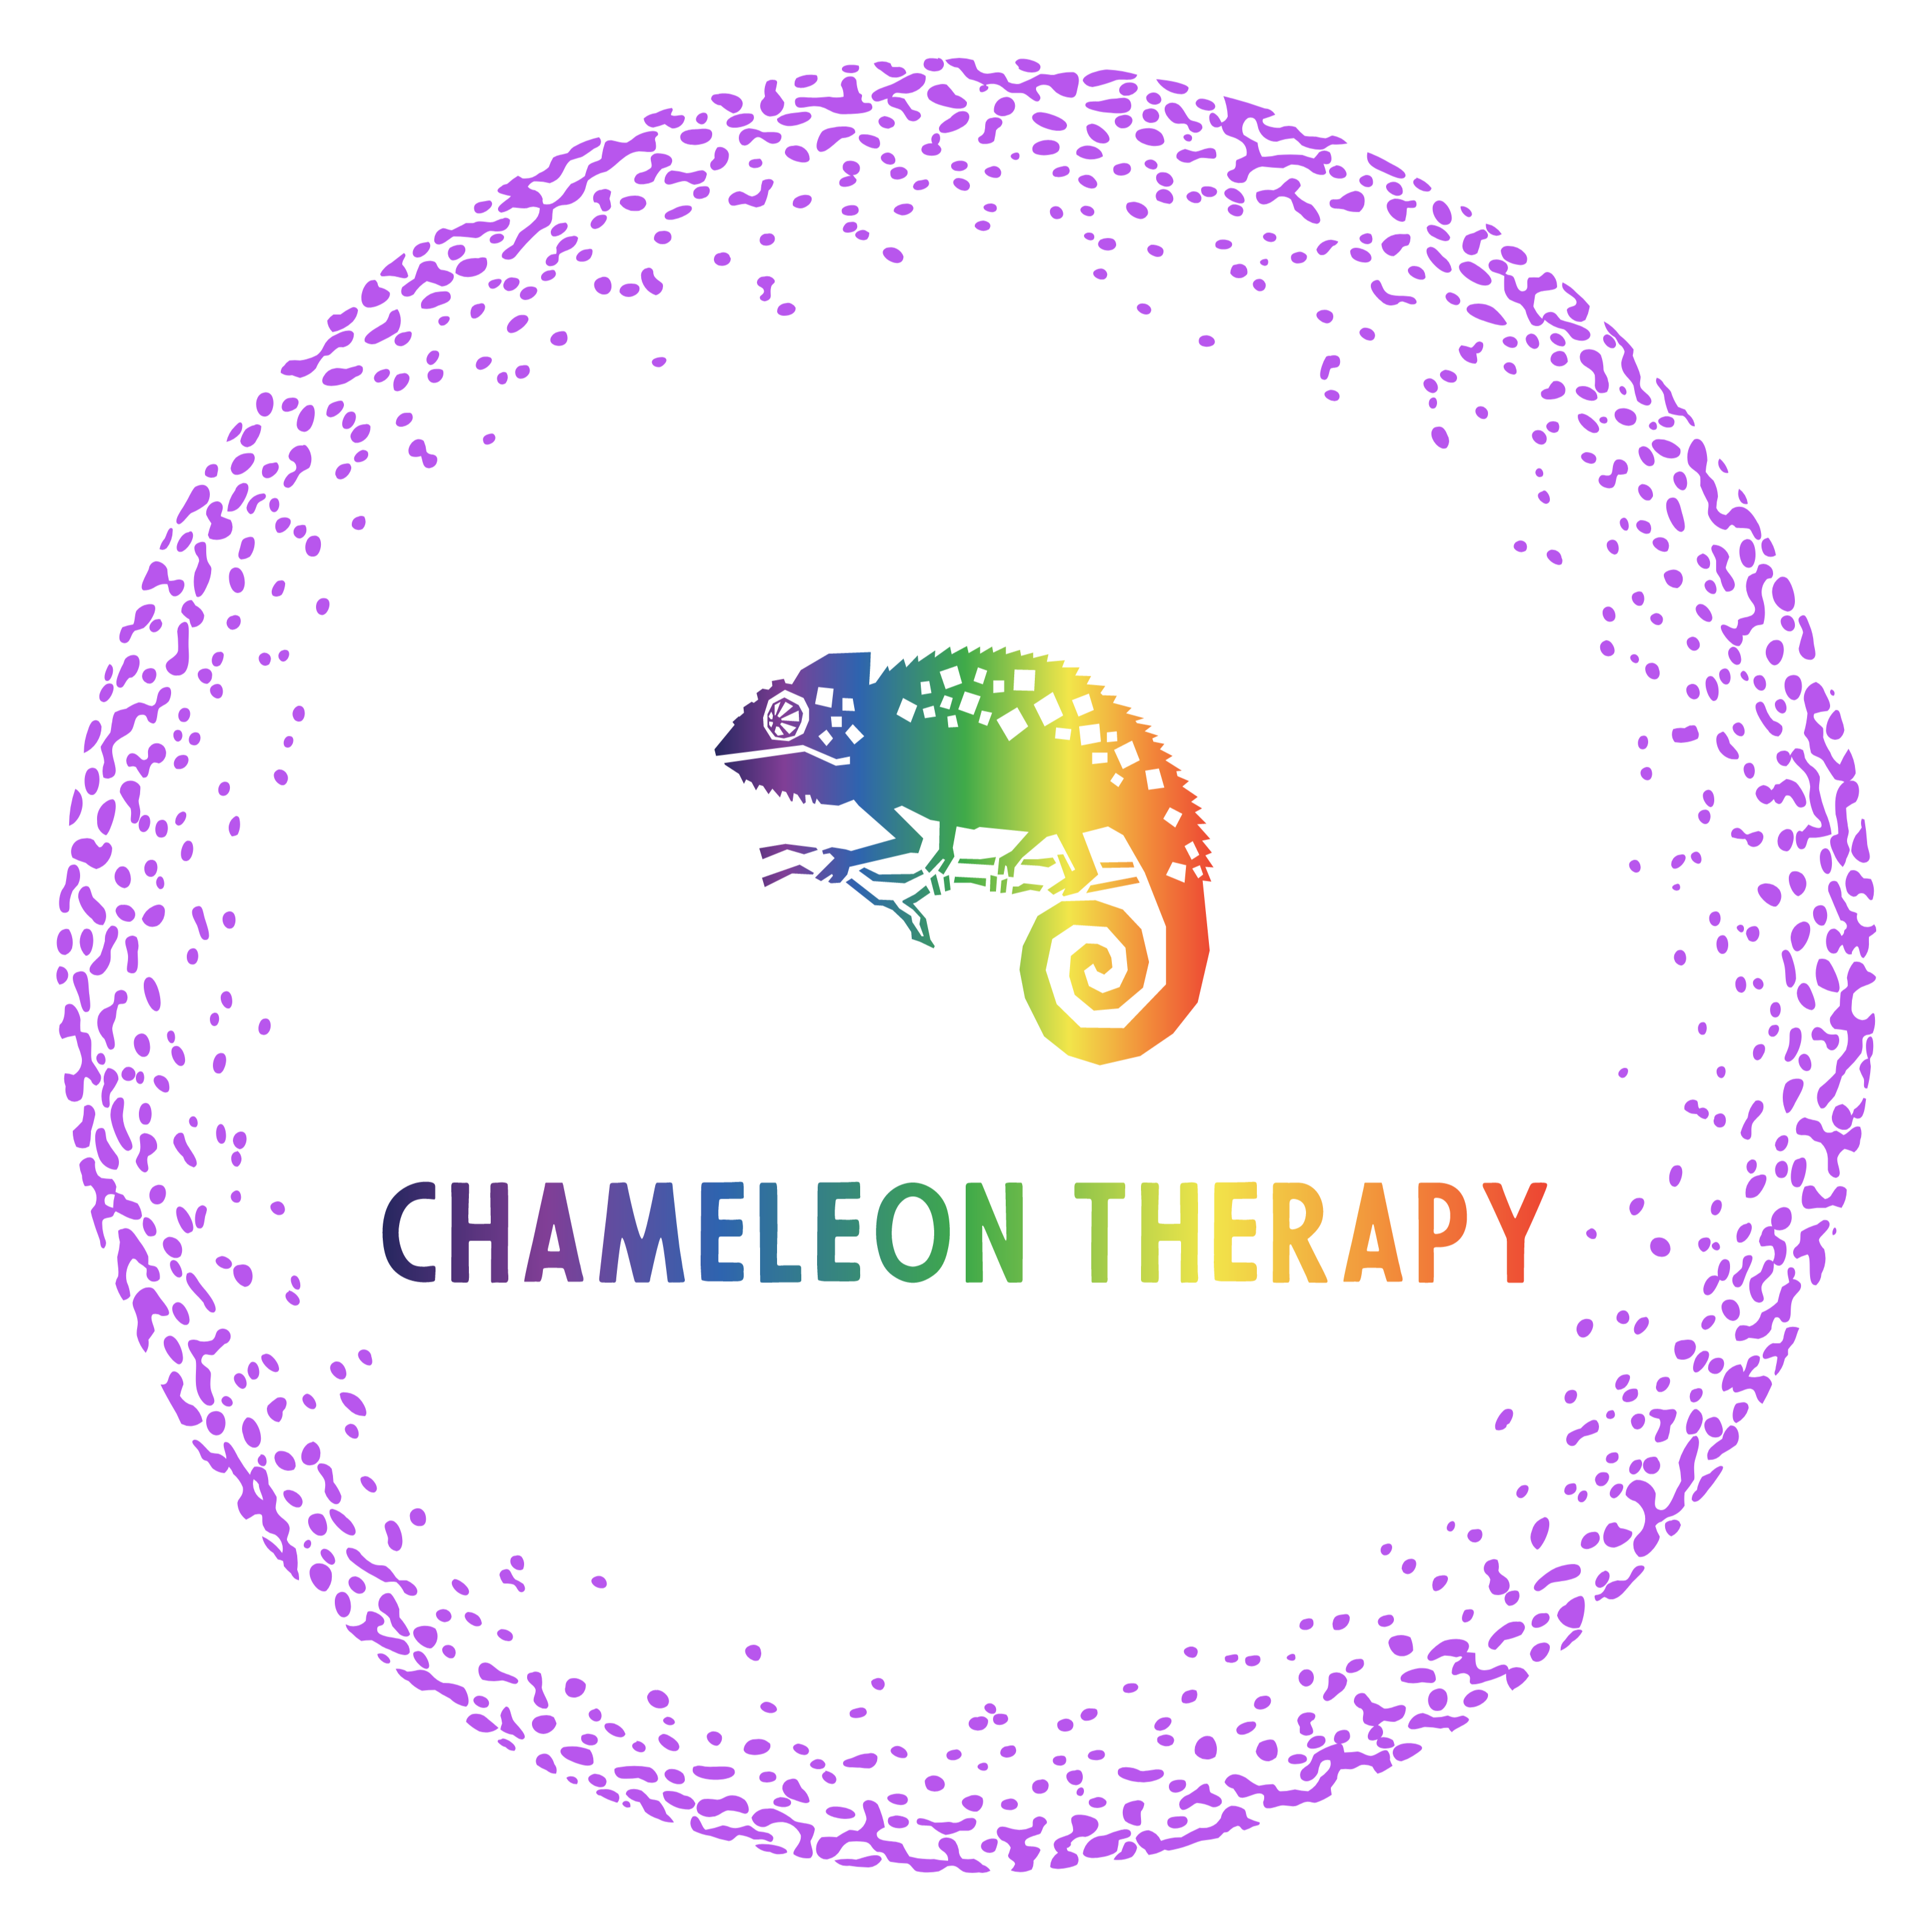 Chameleon Therapy